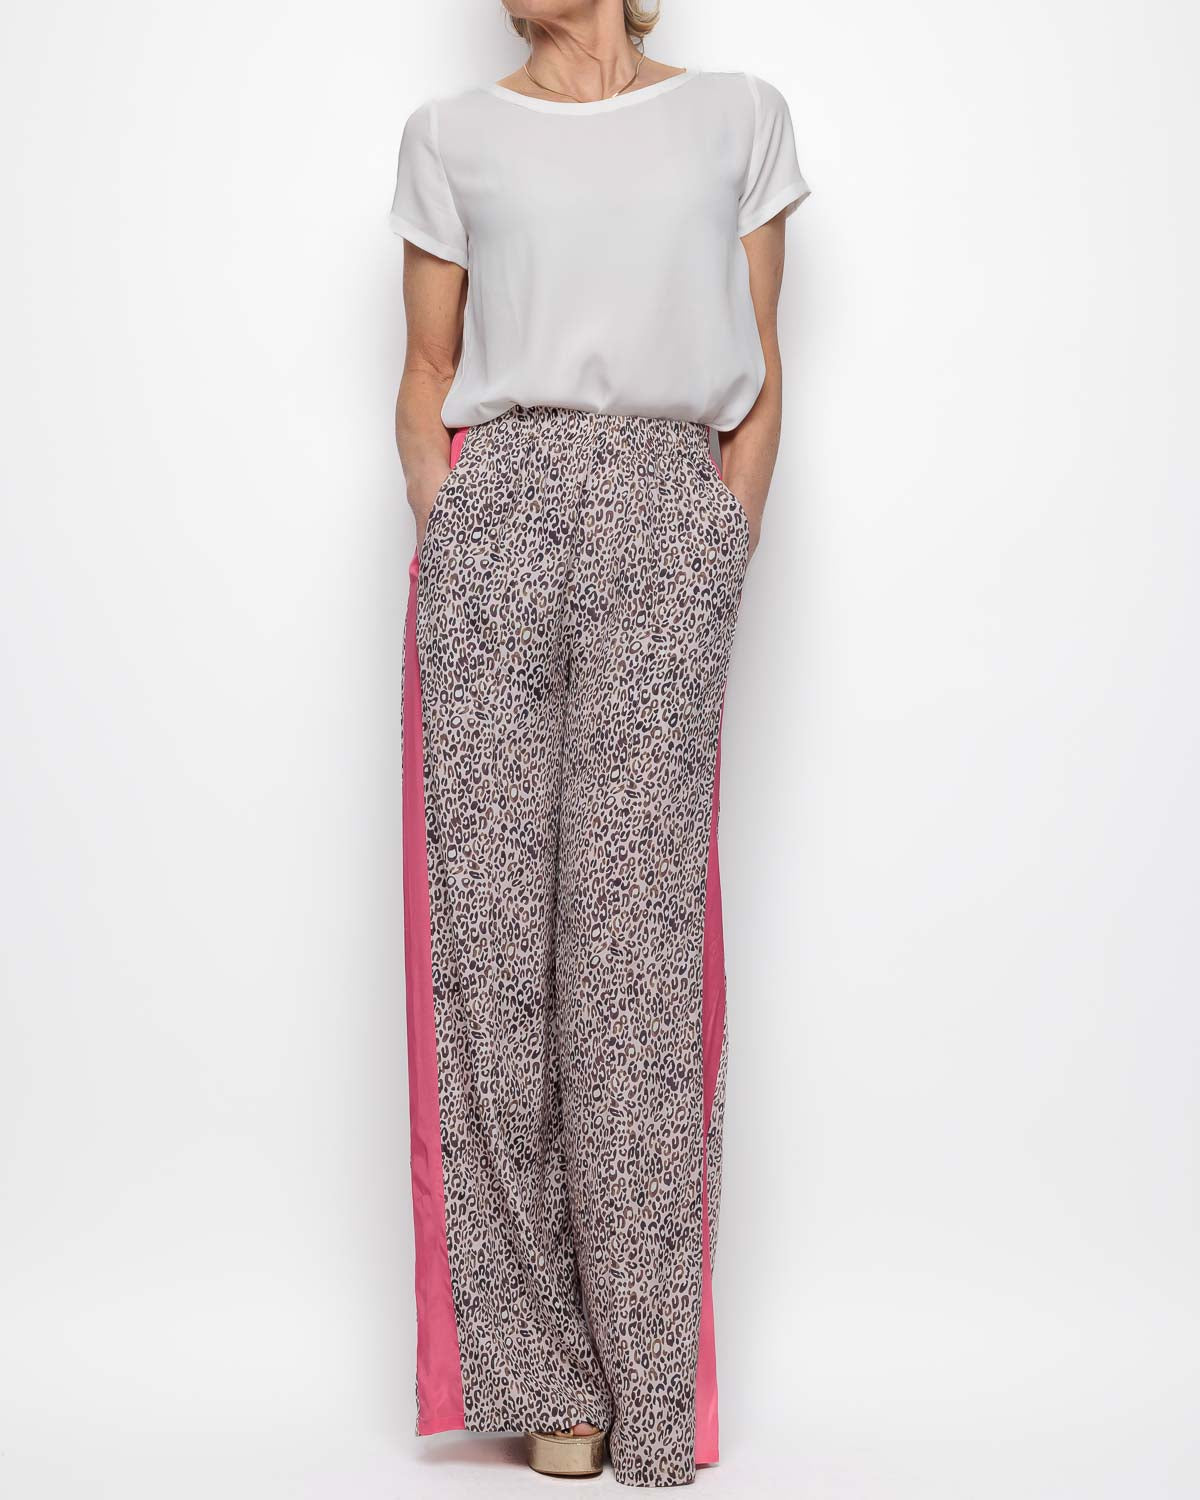 Primrose Park Kylie Trousers in Leopard with Pink Stripe